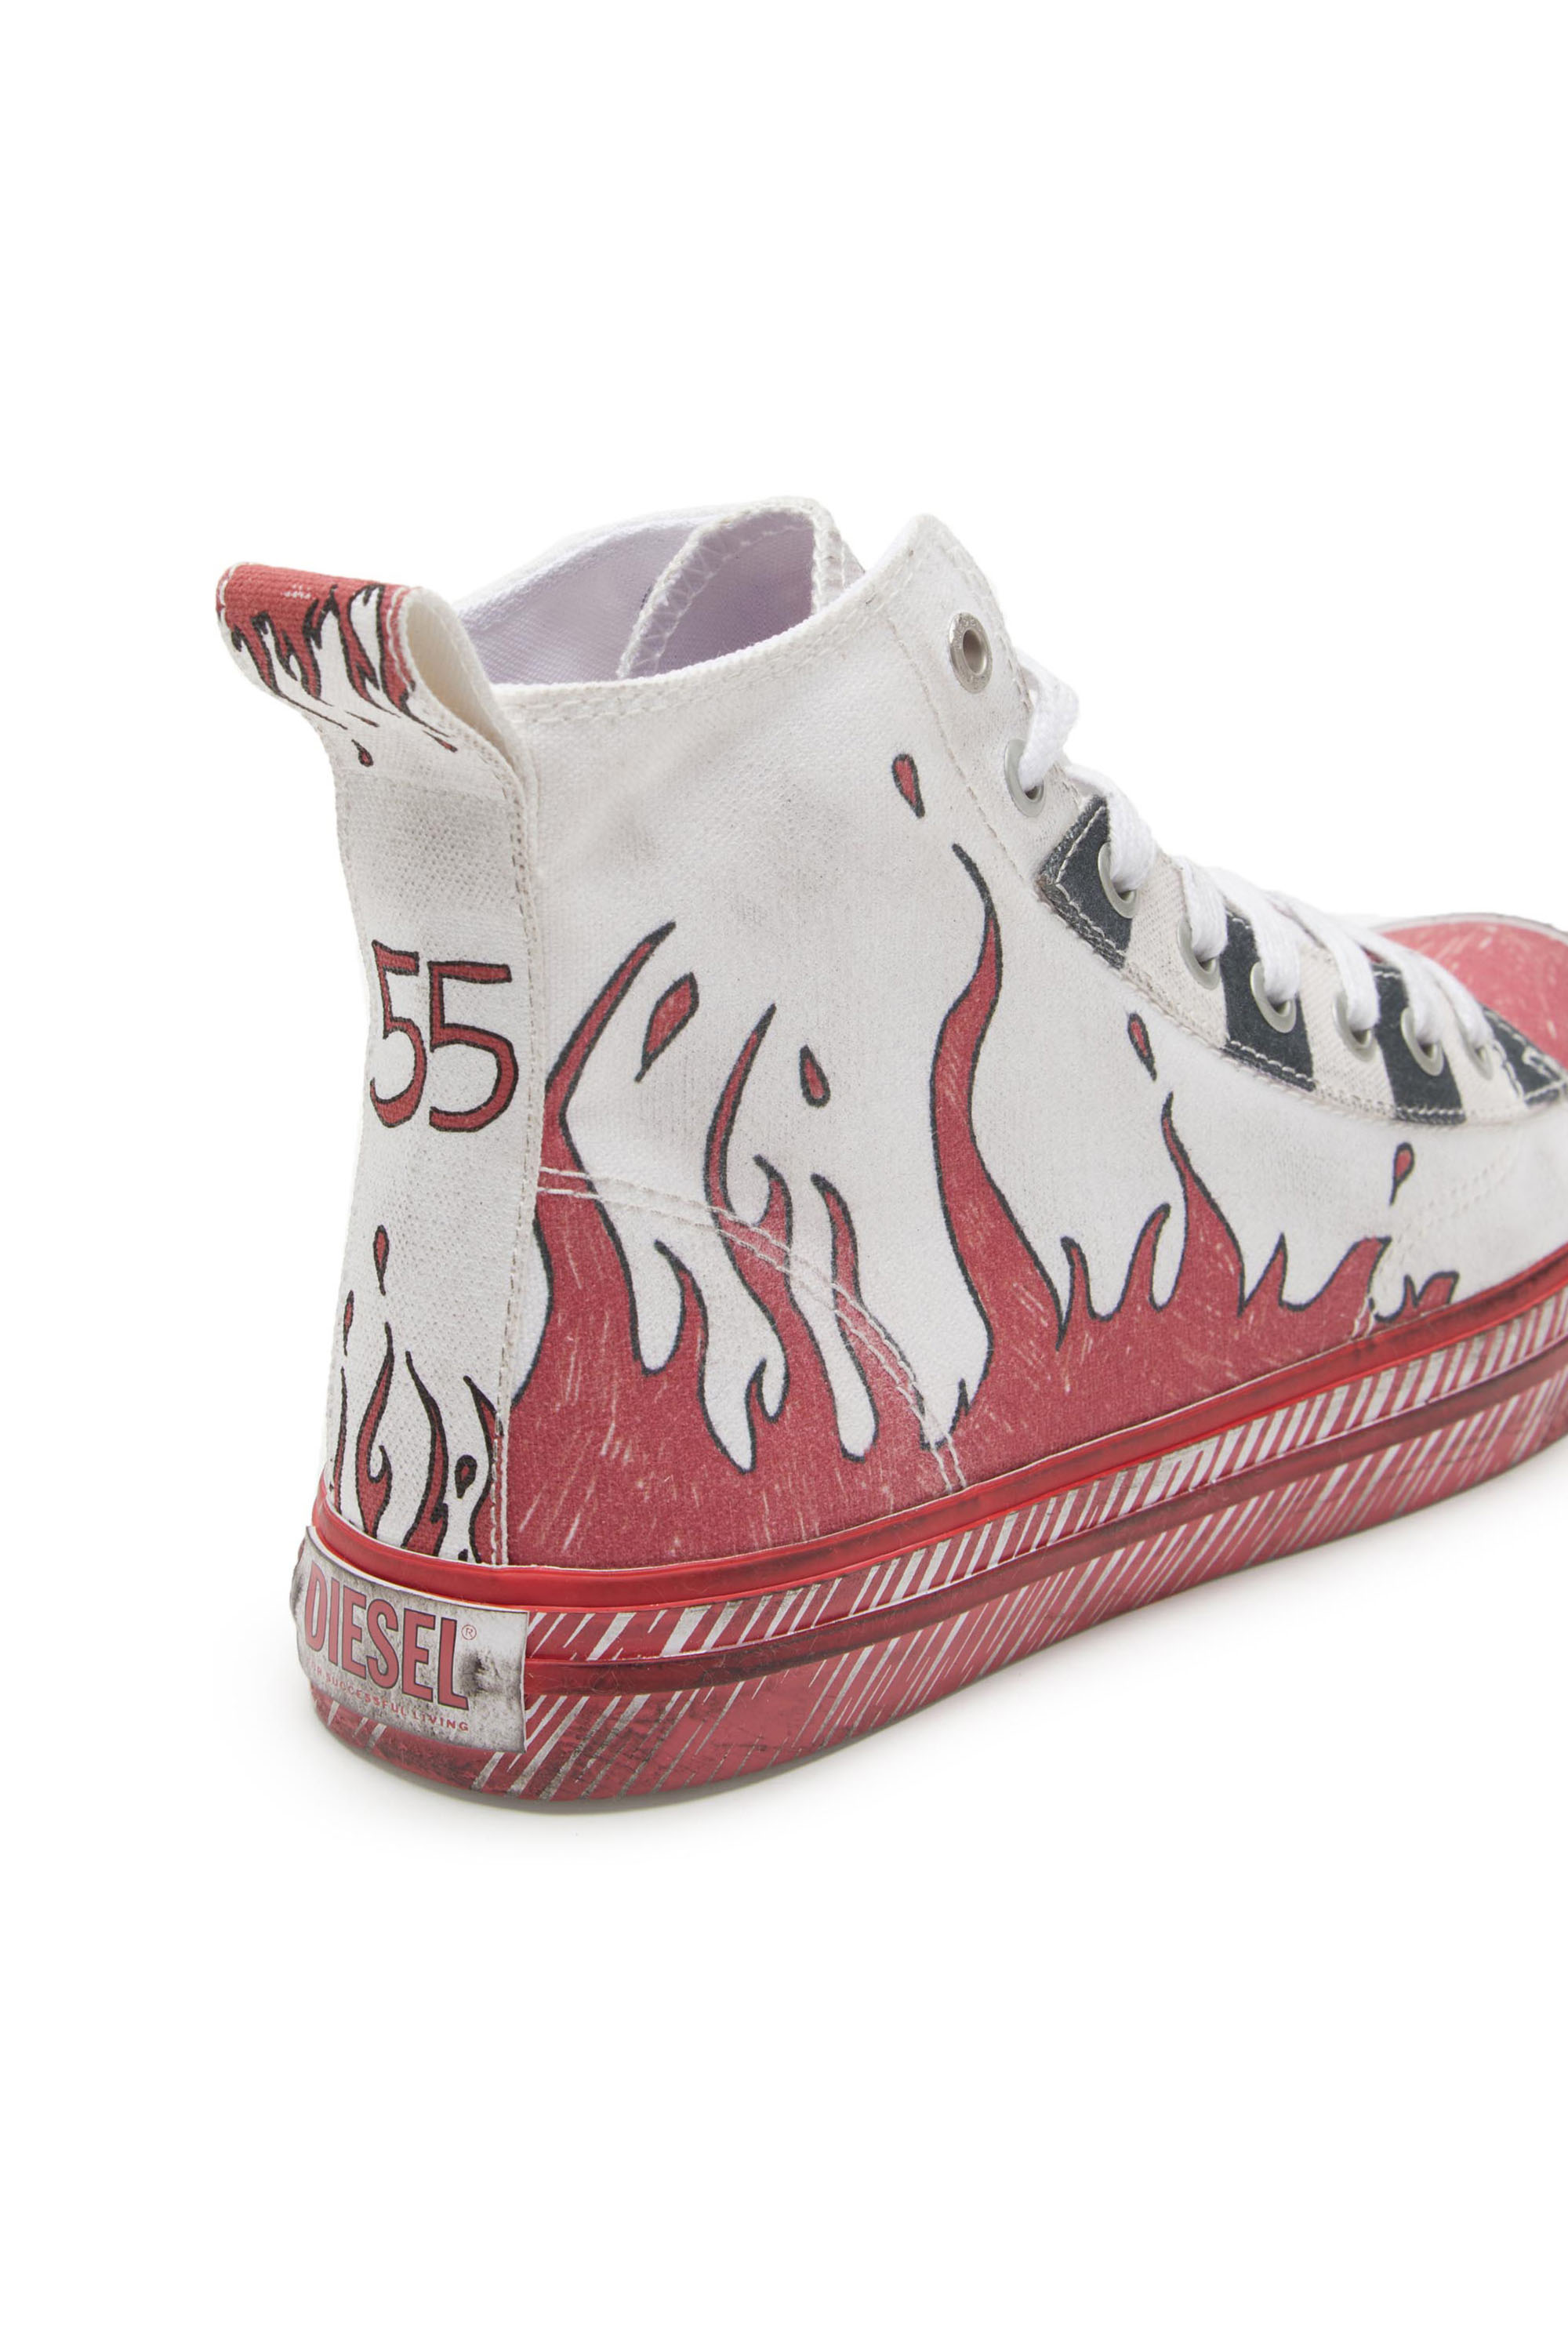 Diesel - S-ATHOS MID W, Weiss/Rot - Image 6